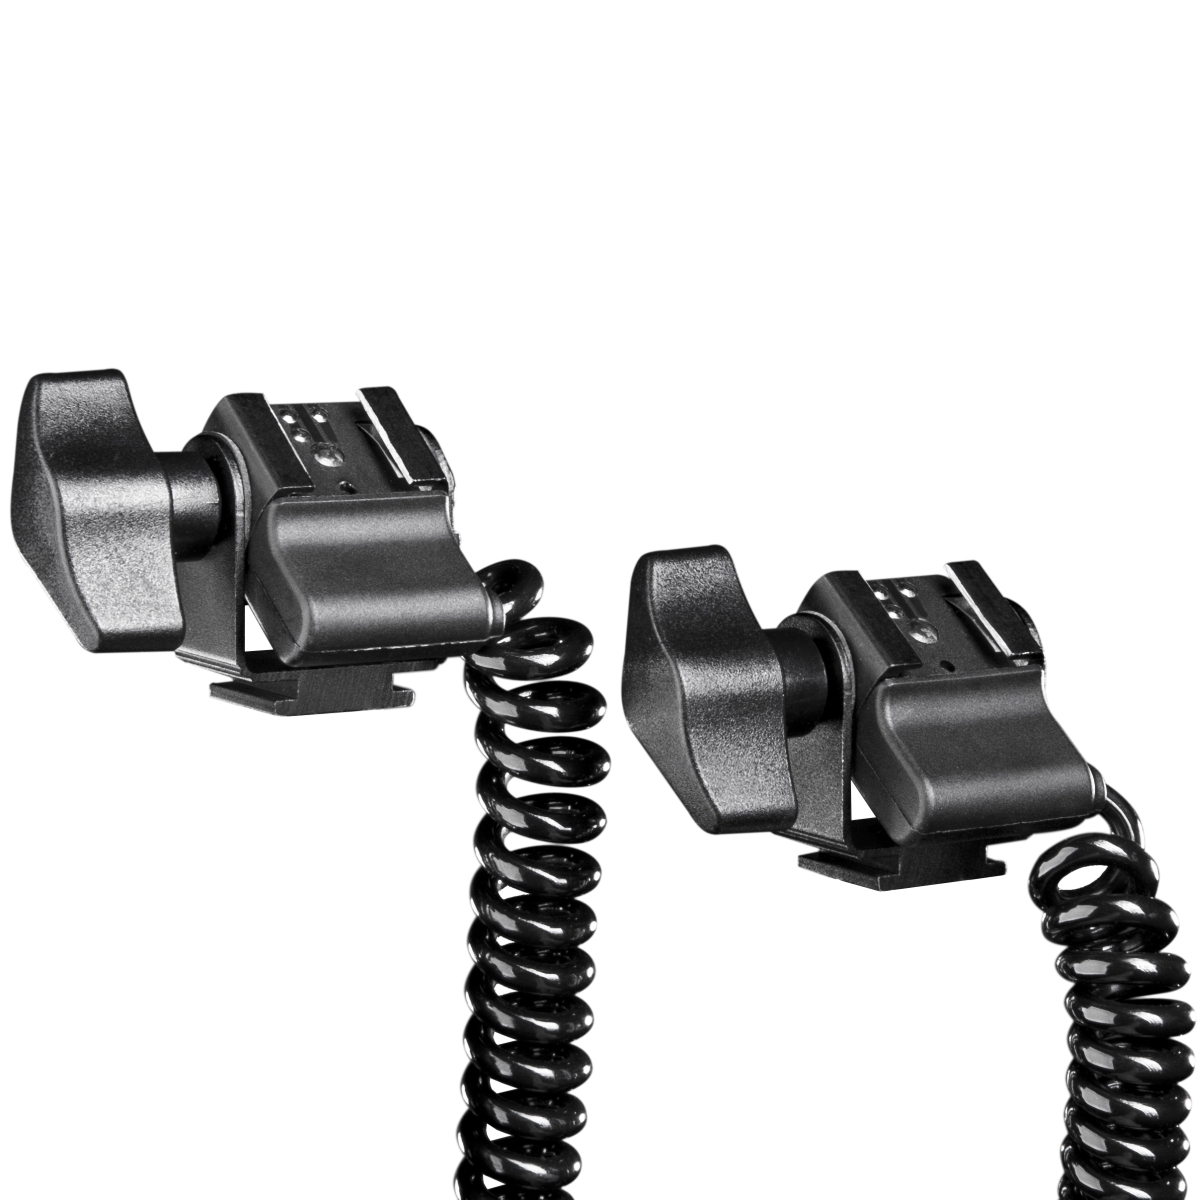 Walimex Double Spiral Flash Cable Panasonic